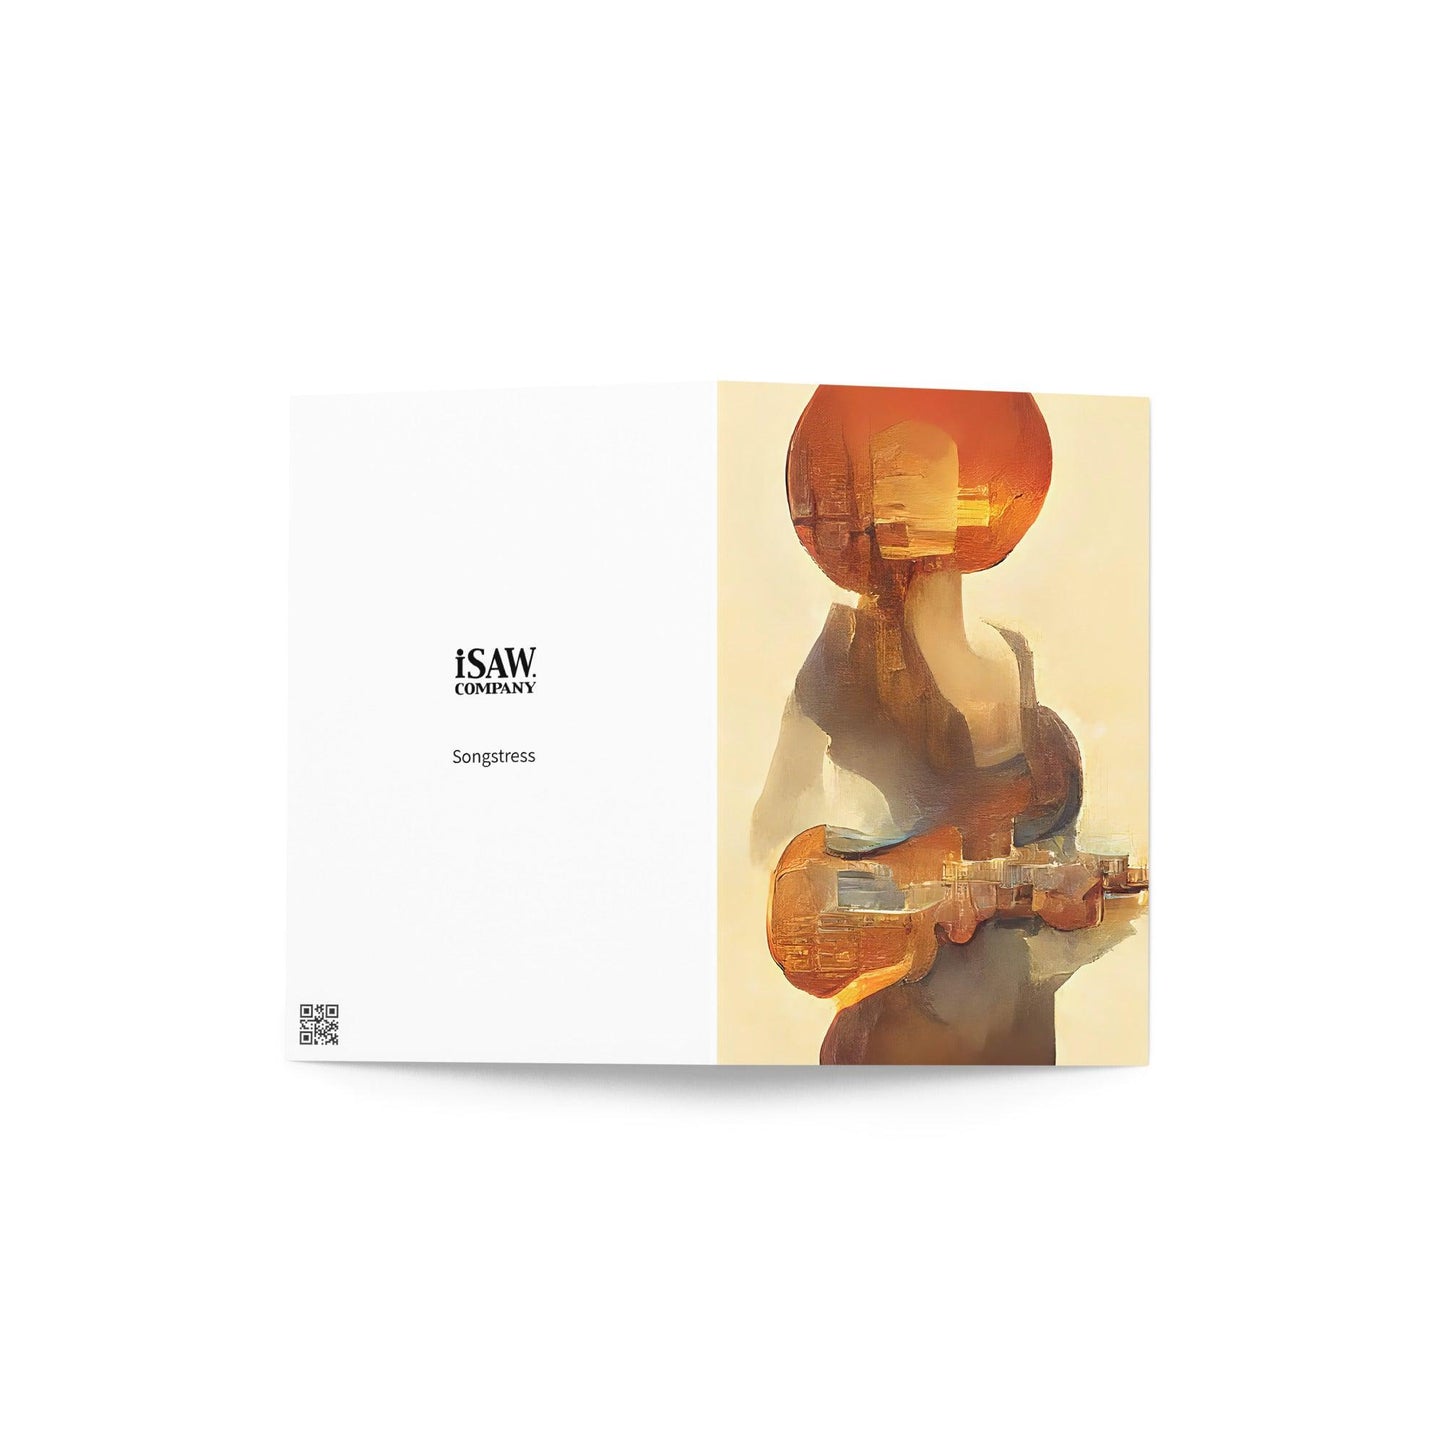 Songstress - Note Card - iSAW Company